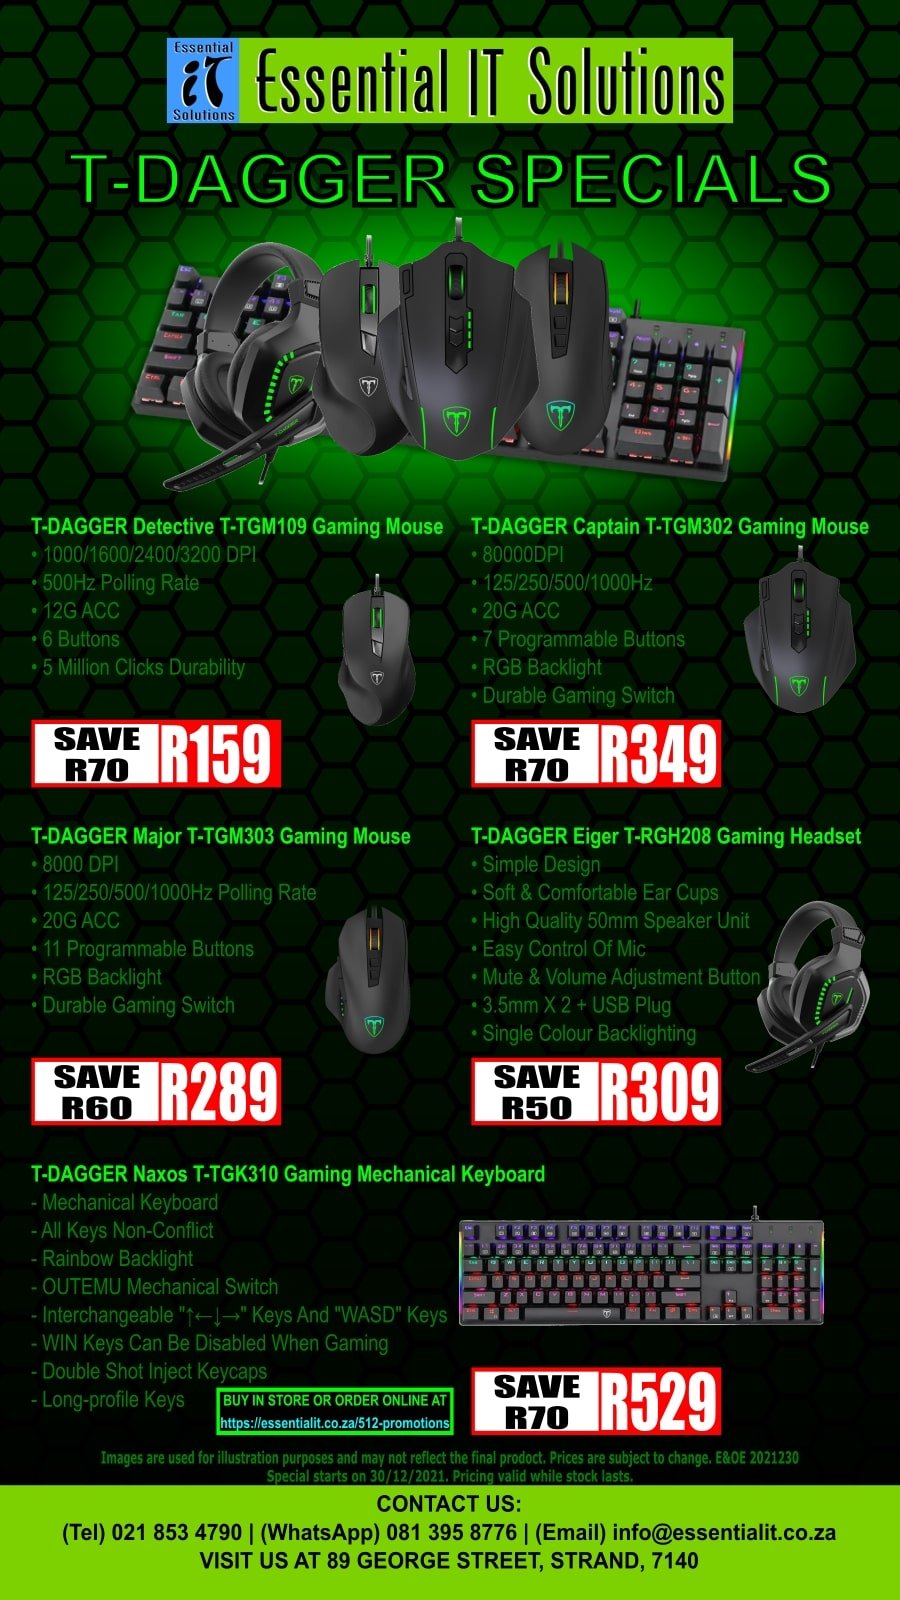 T-Dagger gaming keyboards and mouse on sale